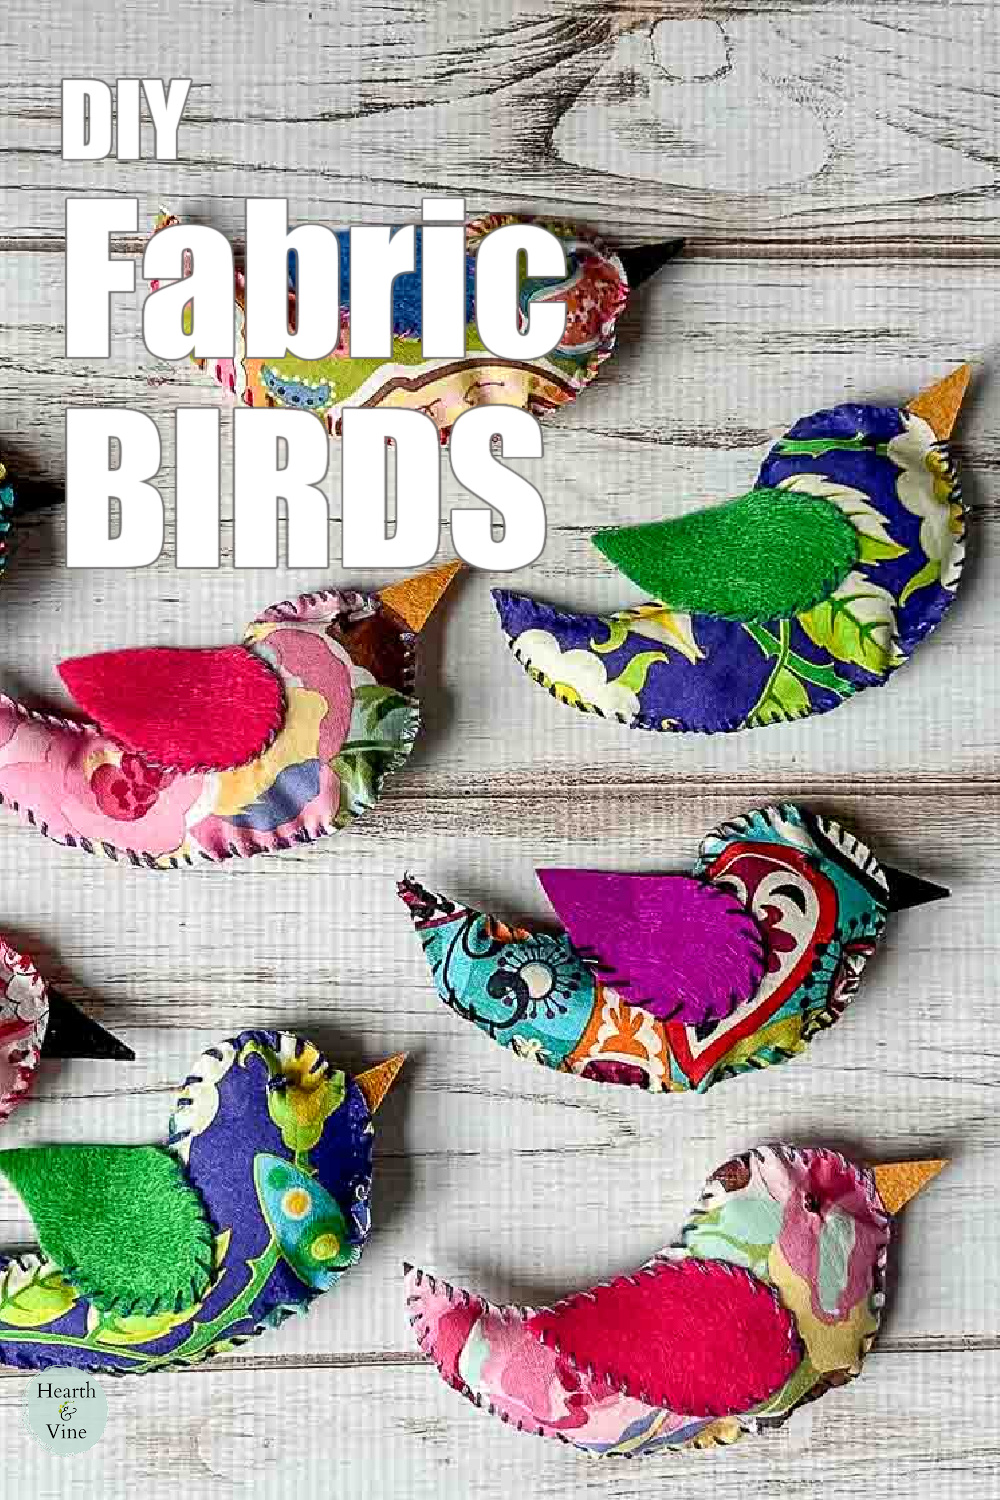 Handsewn fabric birds in colorful variety of fabric.